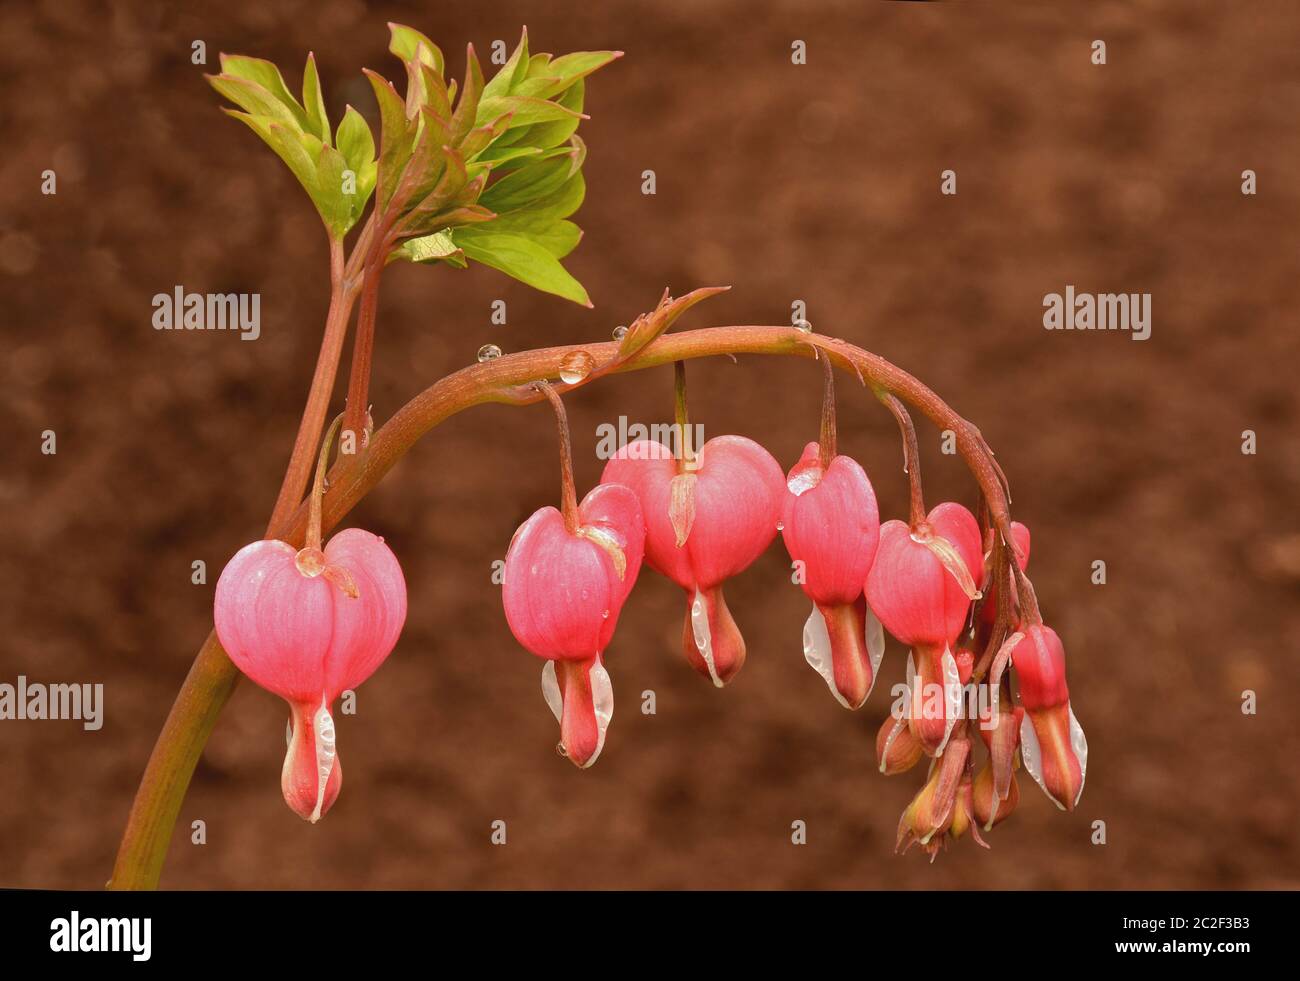 Closeup of spring-flowering pink bleeding heart flower (Dicentra spectabilis) with tiny raindrops clinging to arching stem. Stock Photo